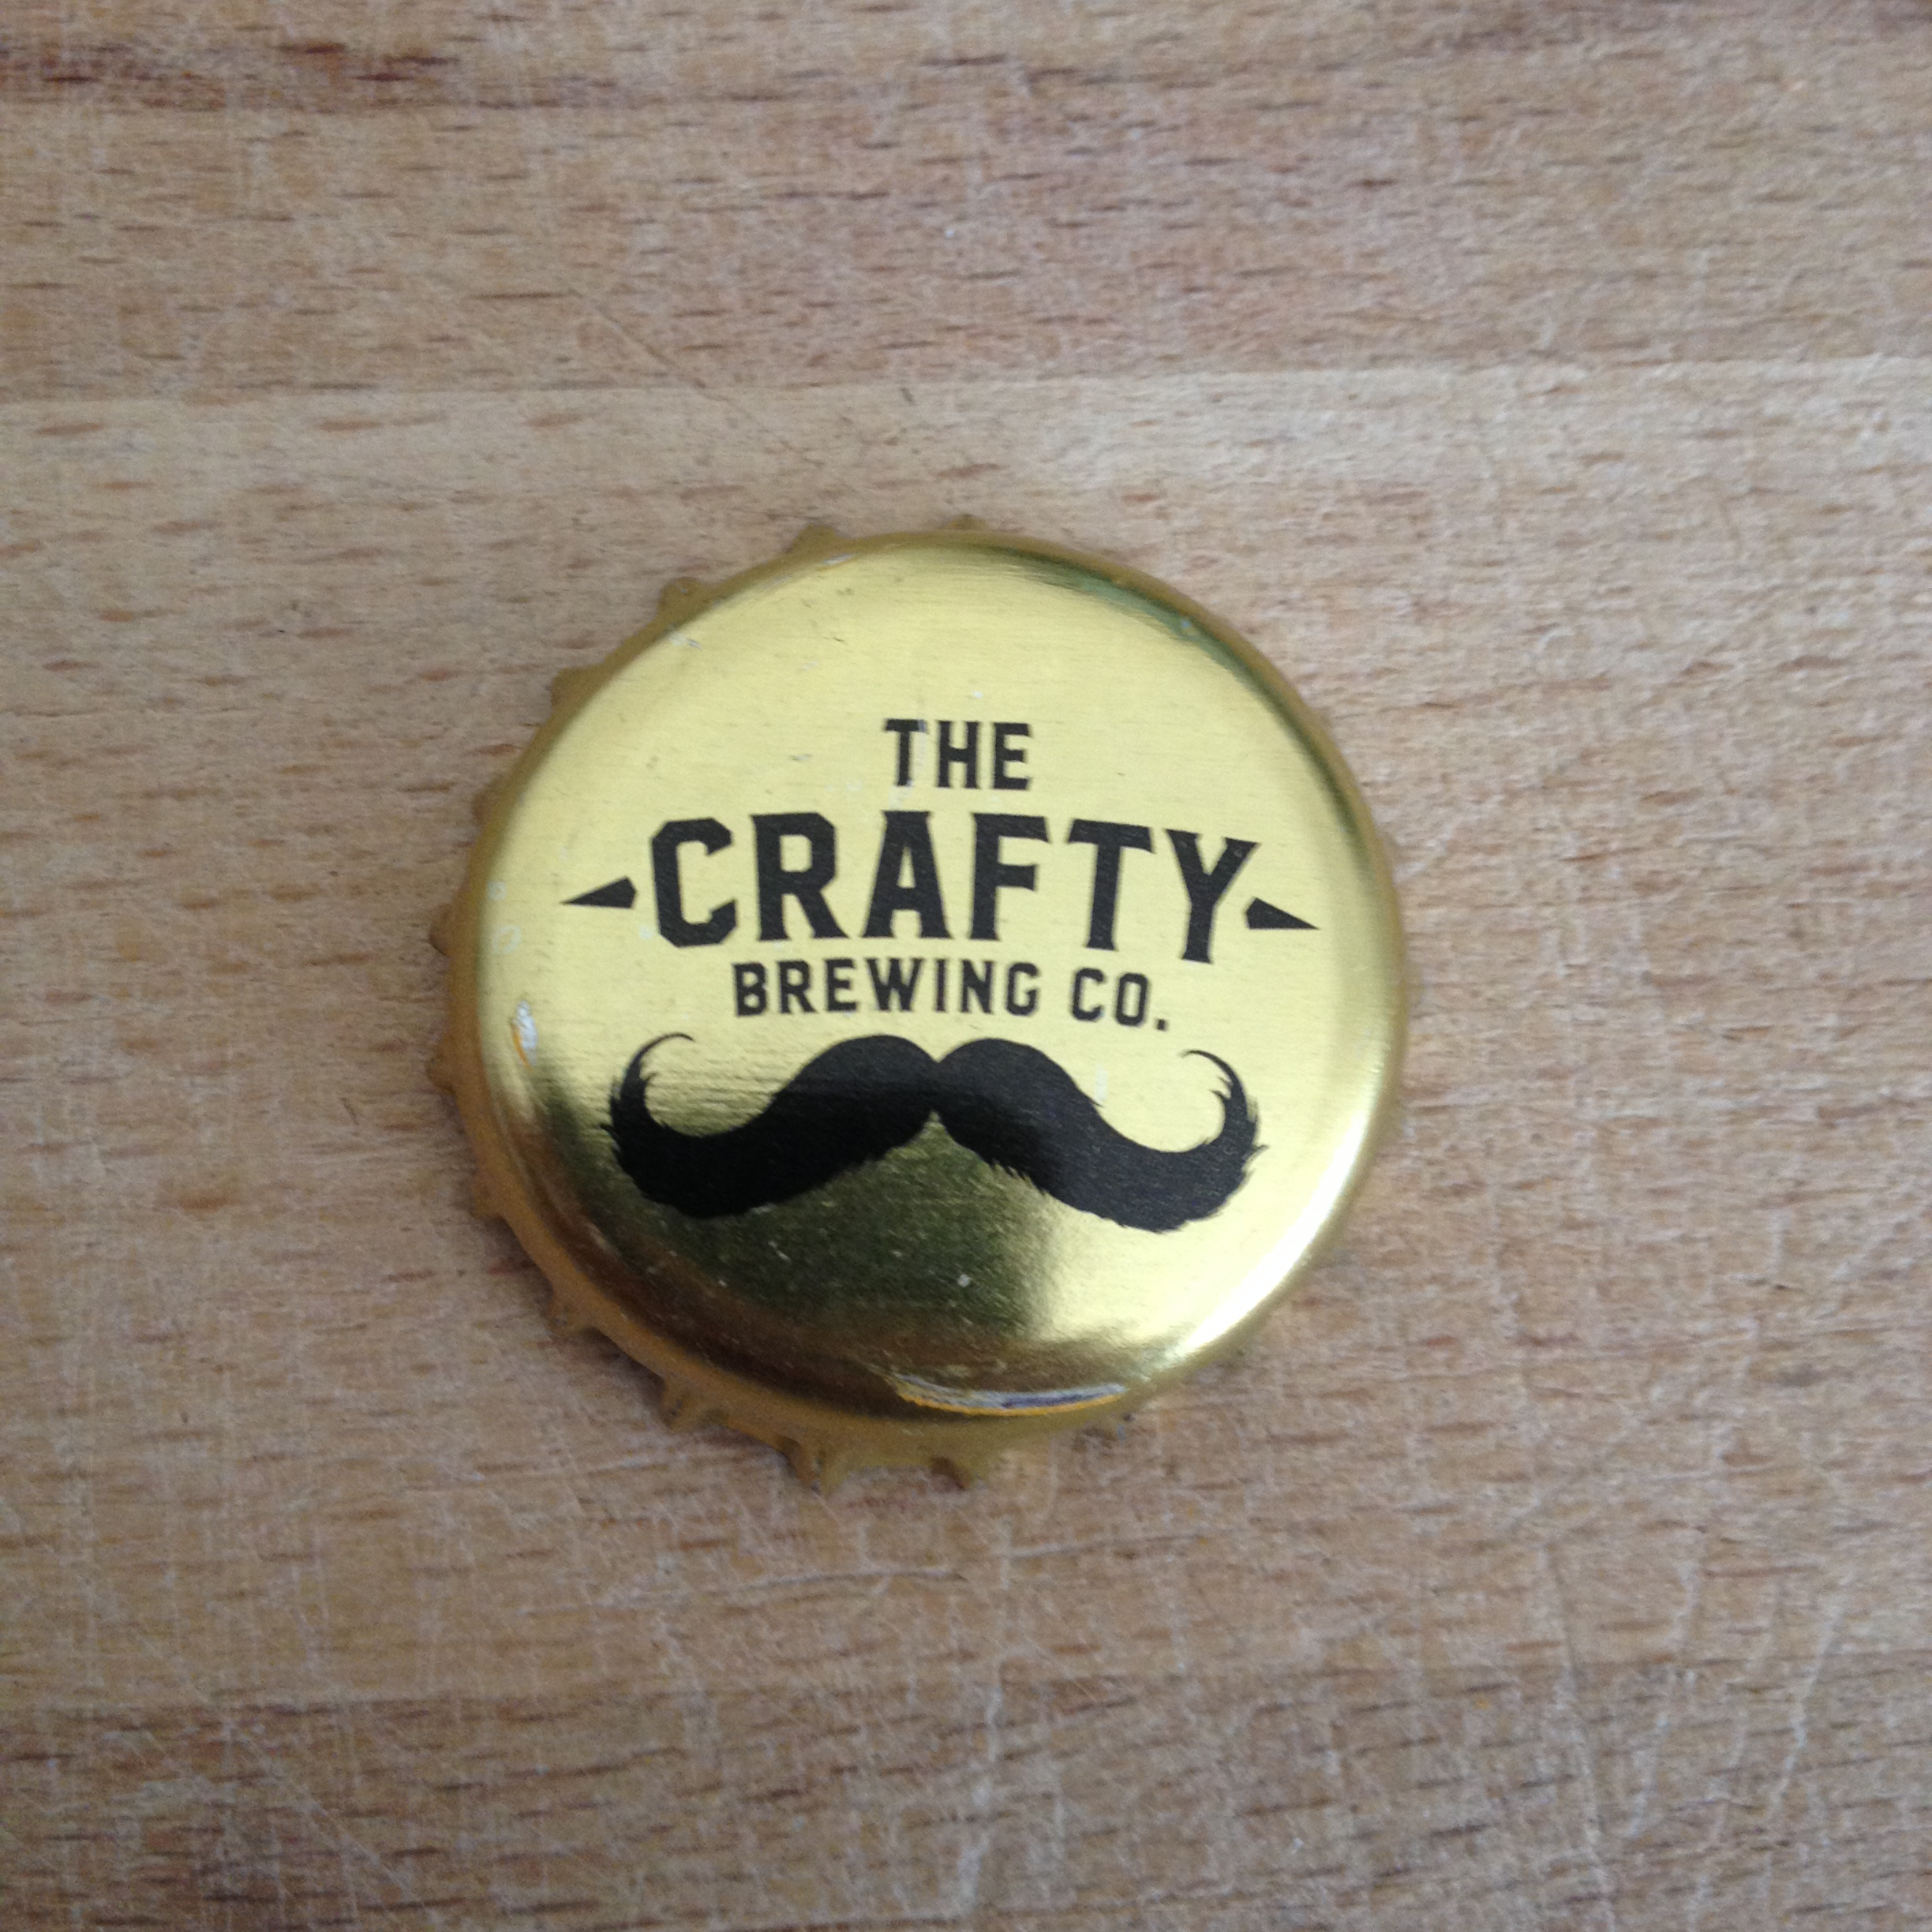 The crafty brewing co.